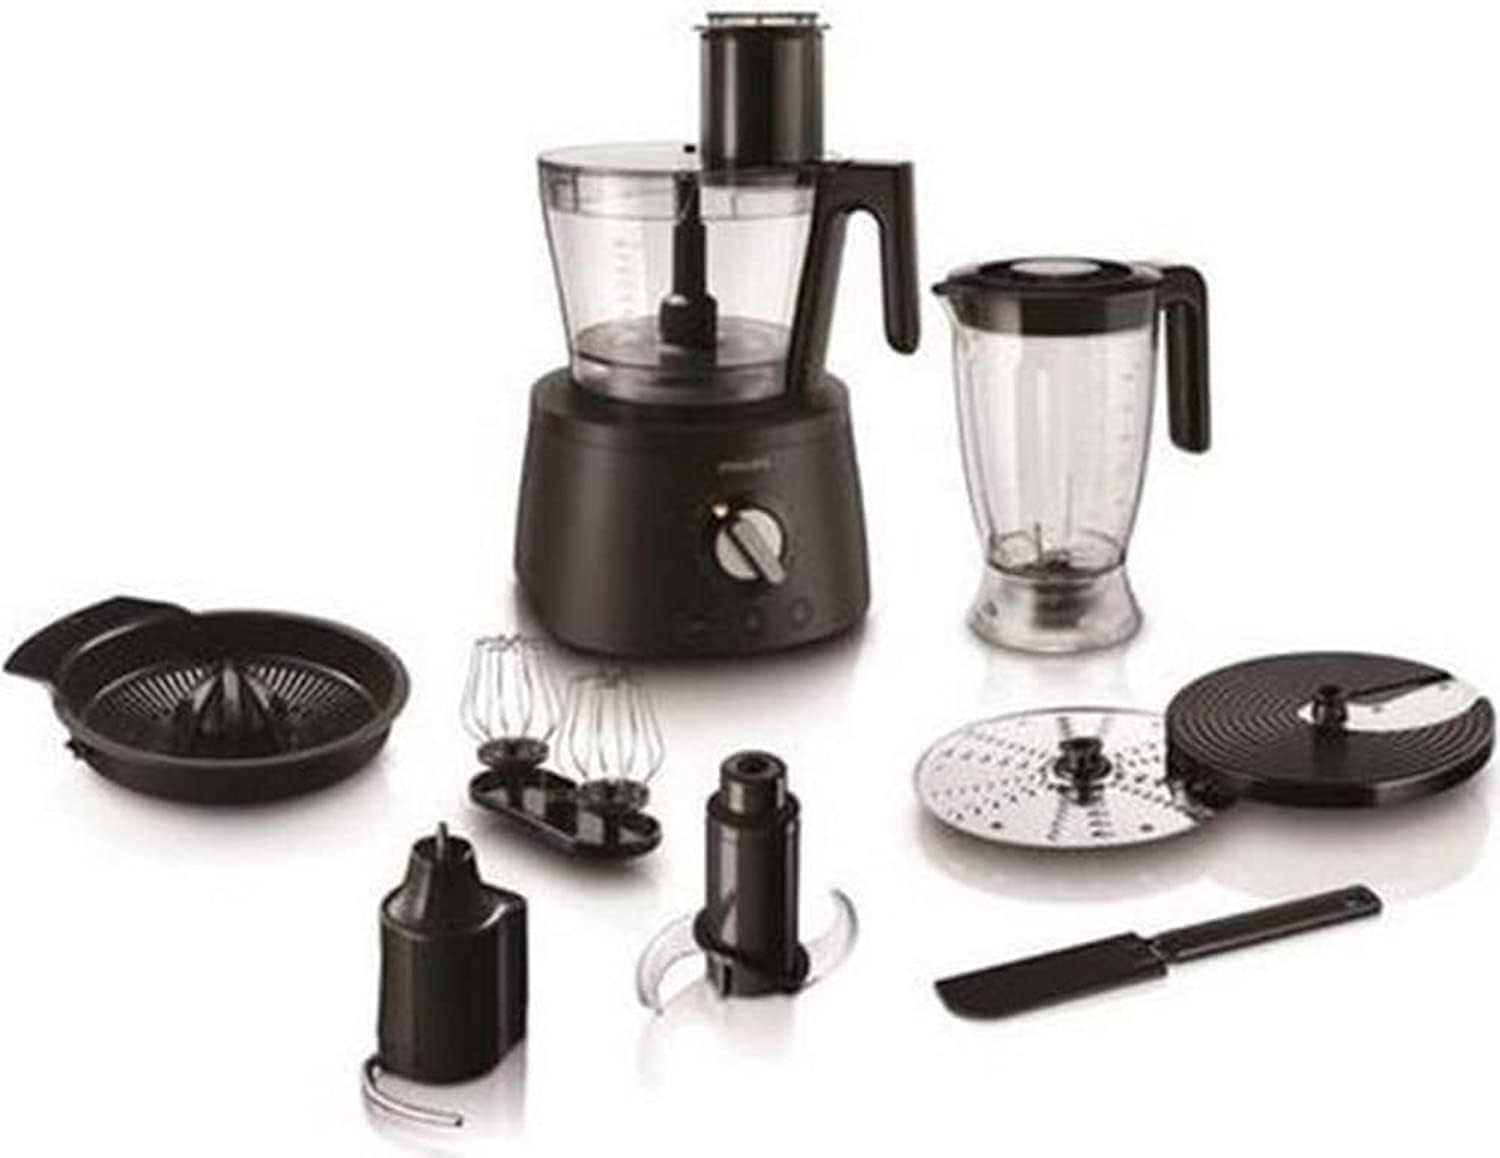 Philips - HR7776/91 - Robot Kit / Mixer 1300W Capacity, 3 in 1.3.4 l Bowl